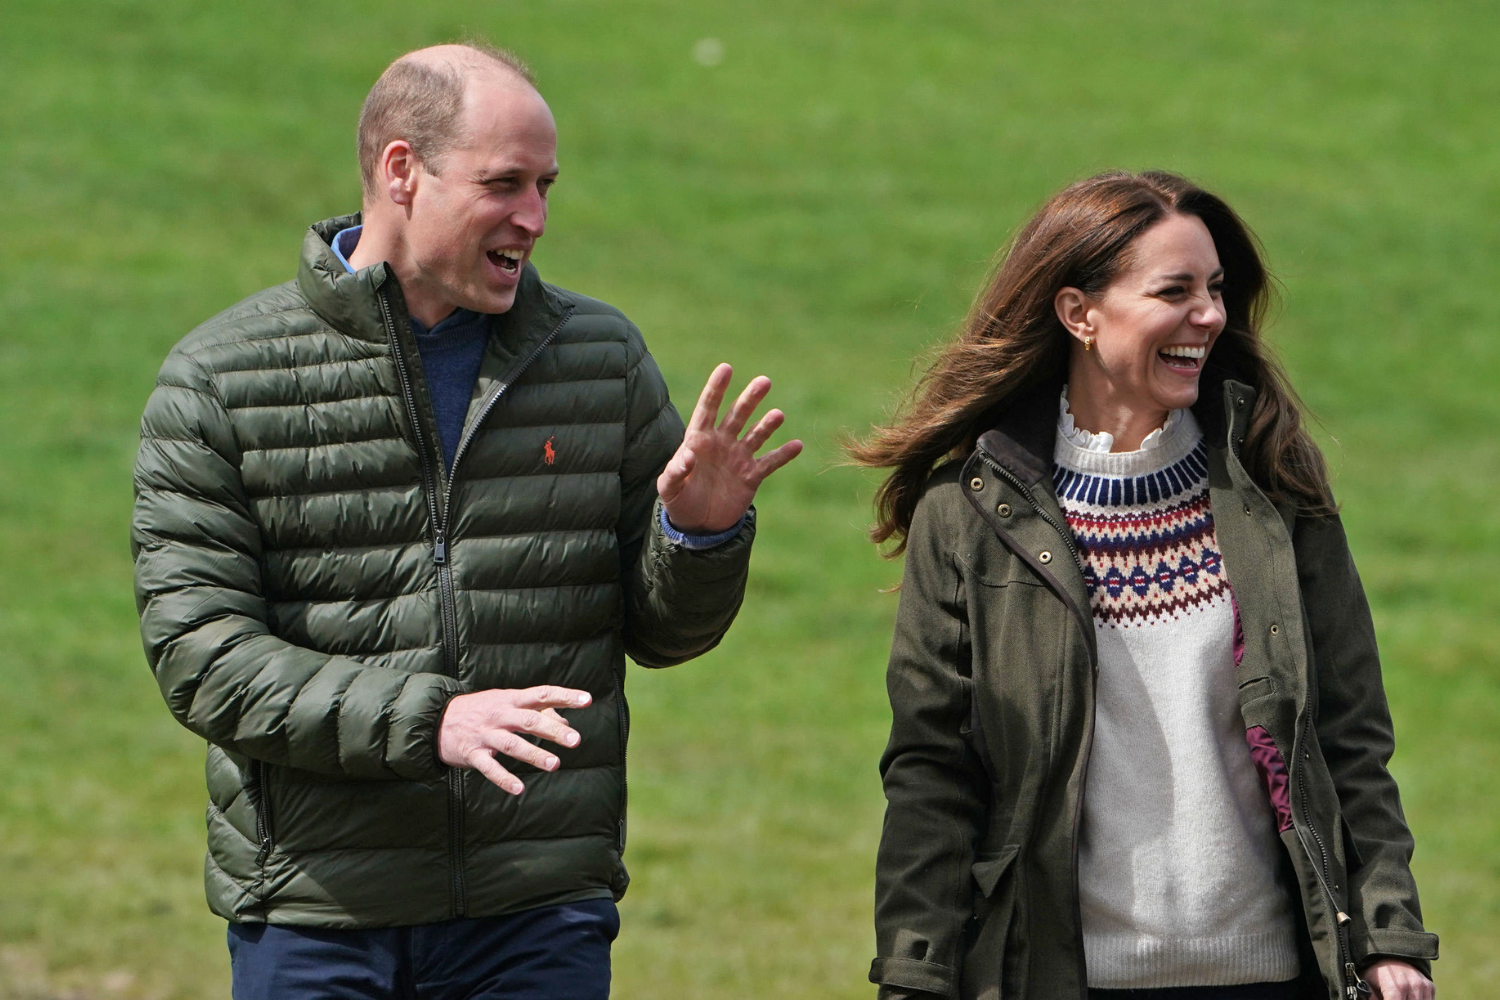 Prince William laughs “a little too hard” at Kate Middleton in TikTok clip